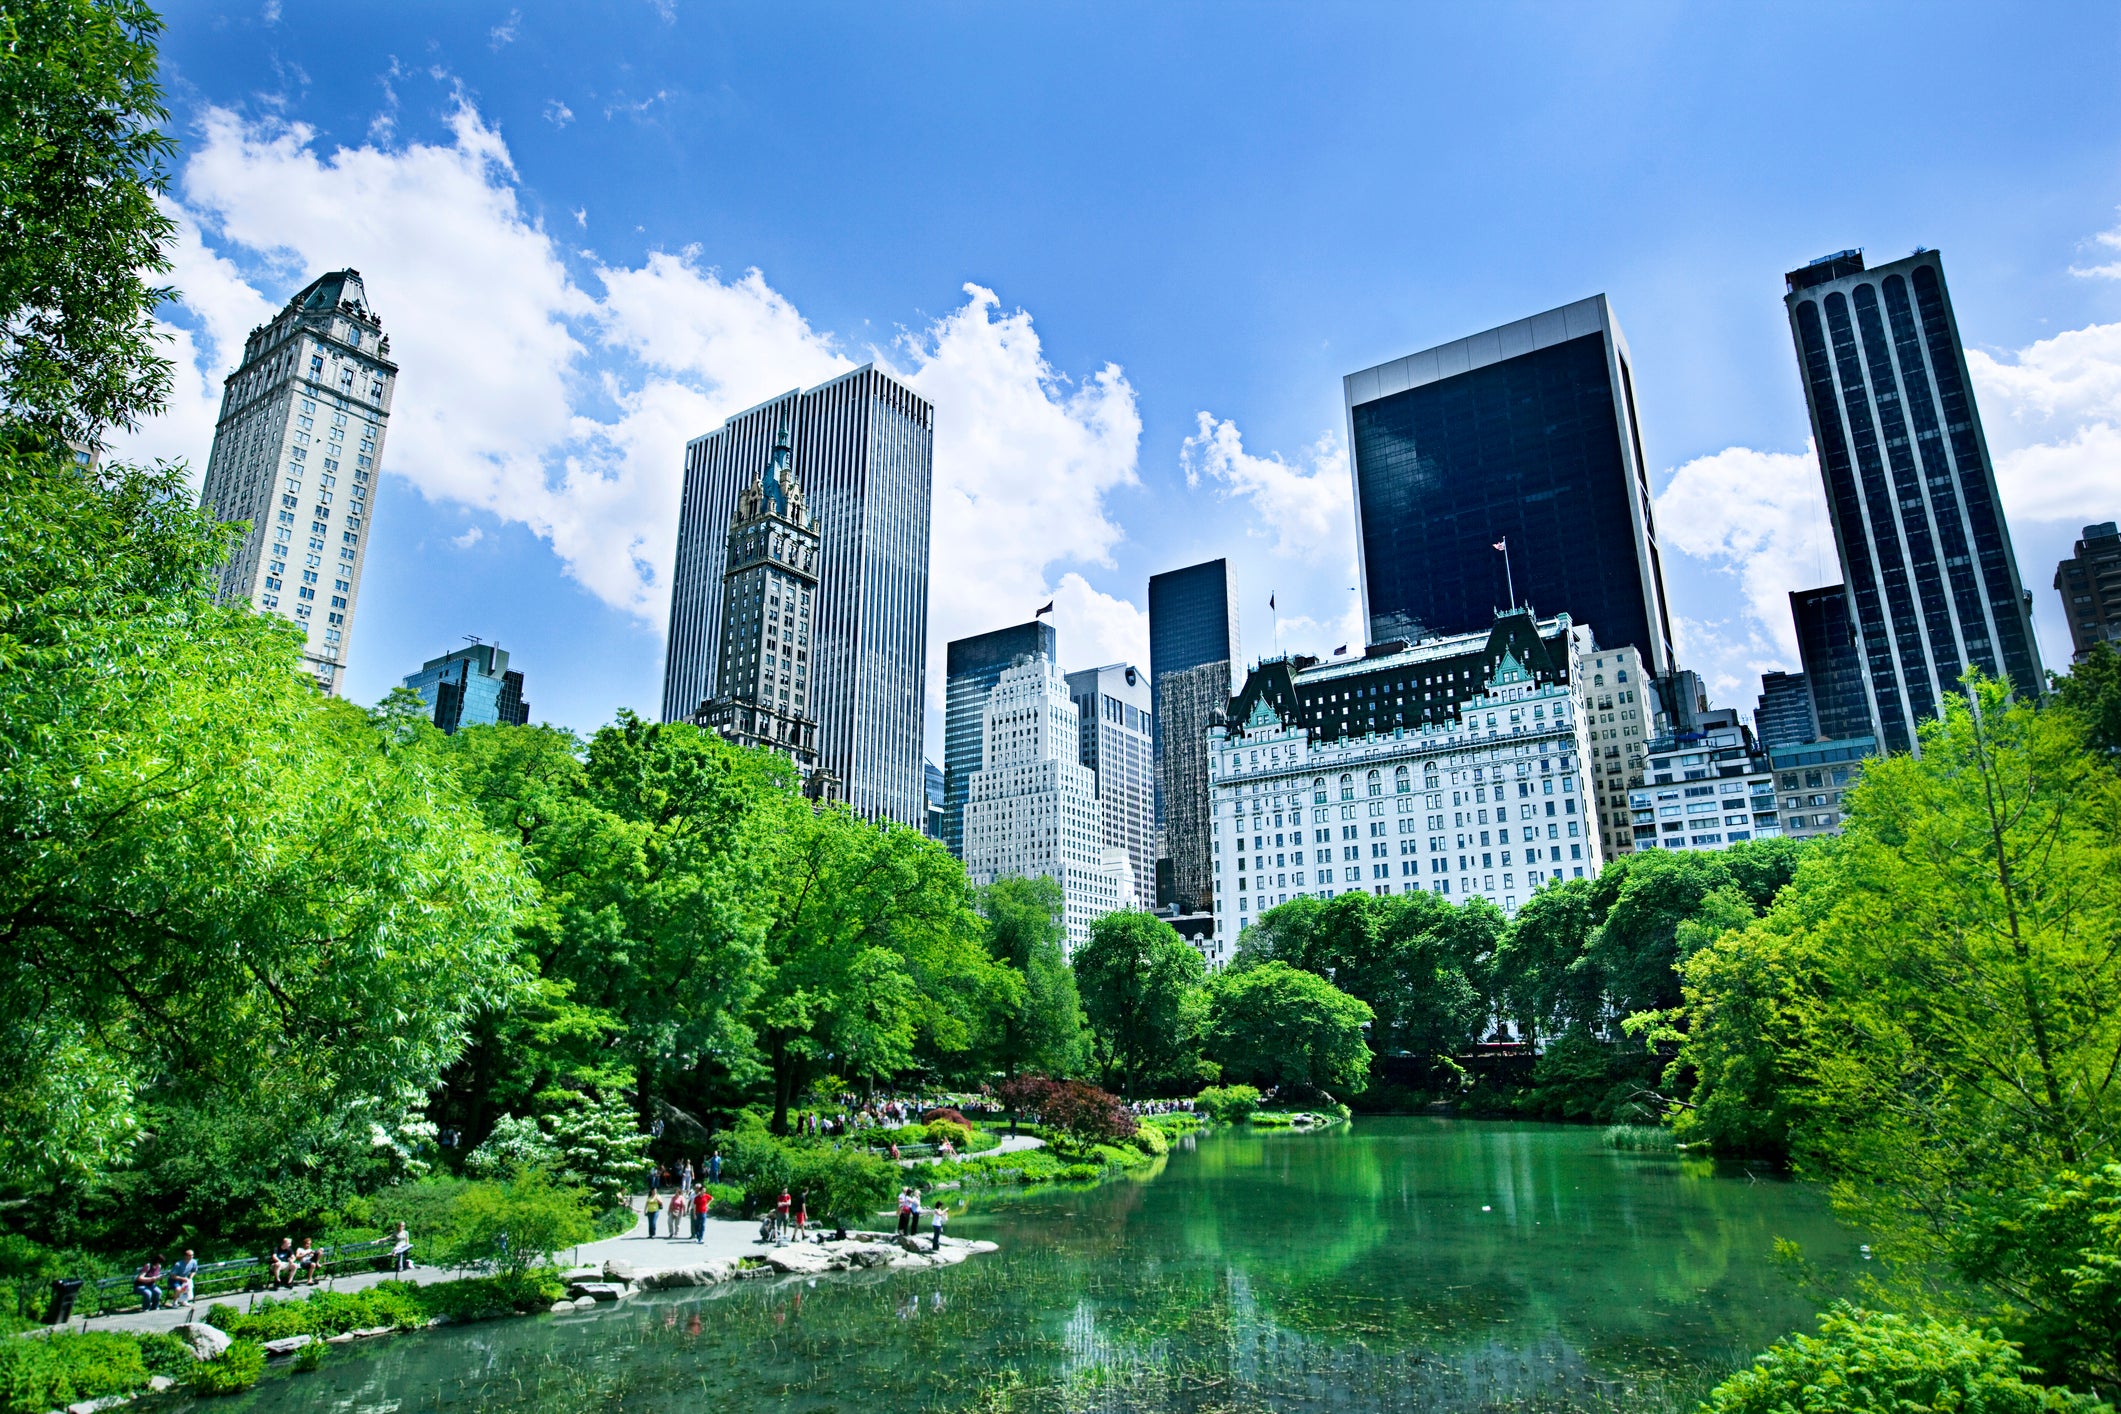 The Plaza Hotel overlooks New York’s Central Park